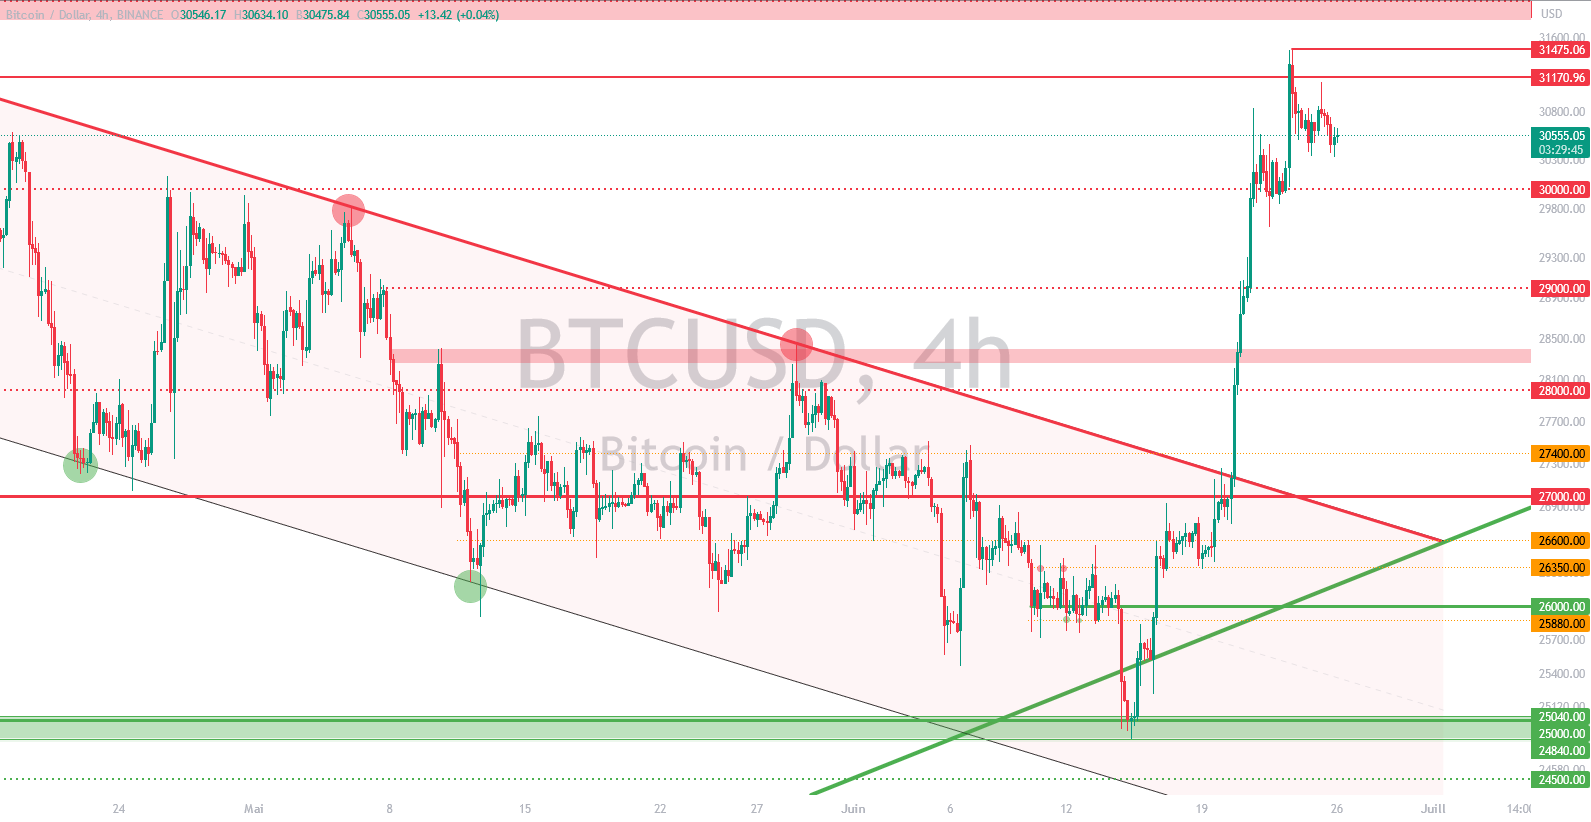 BTC/USD price chart over 4 hours
